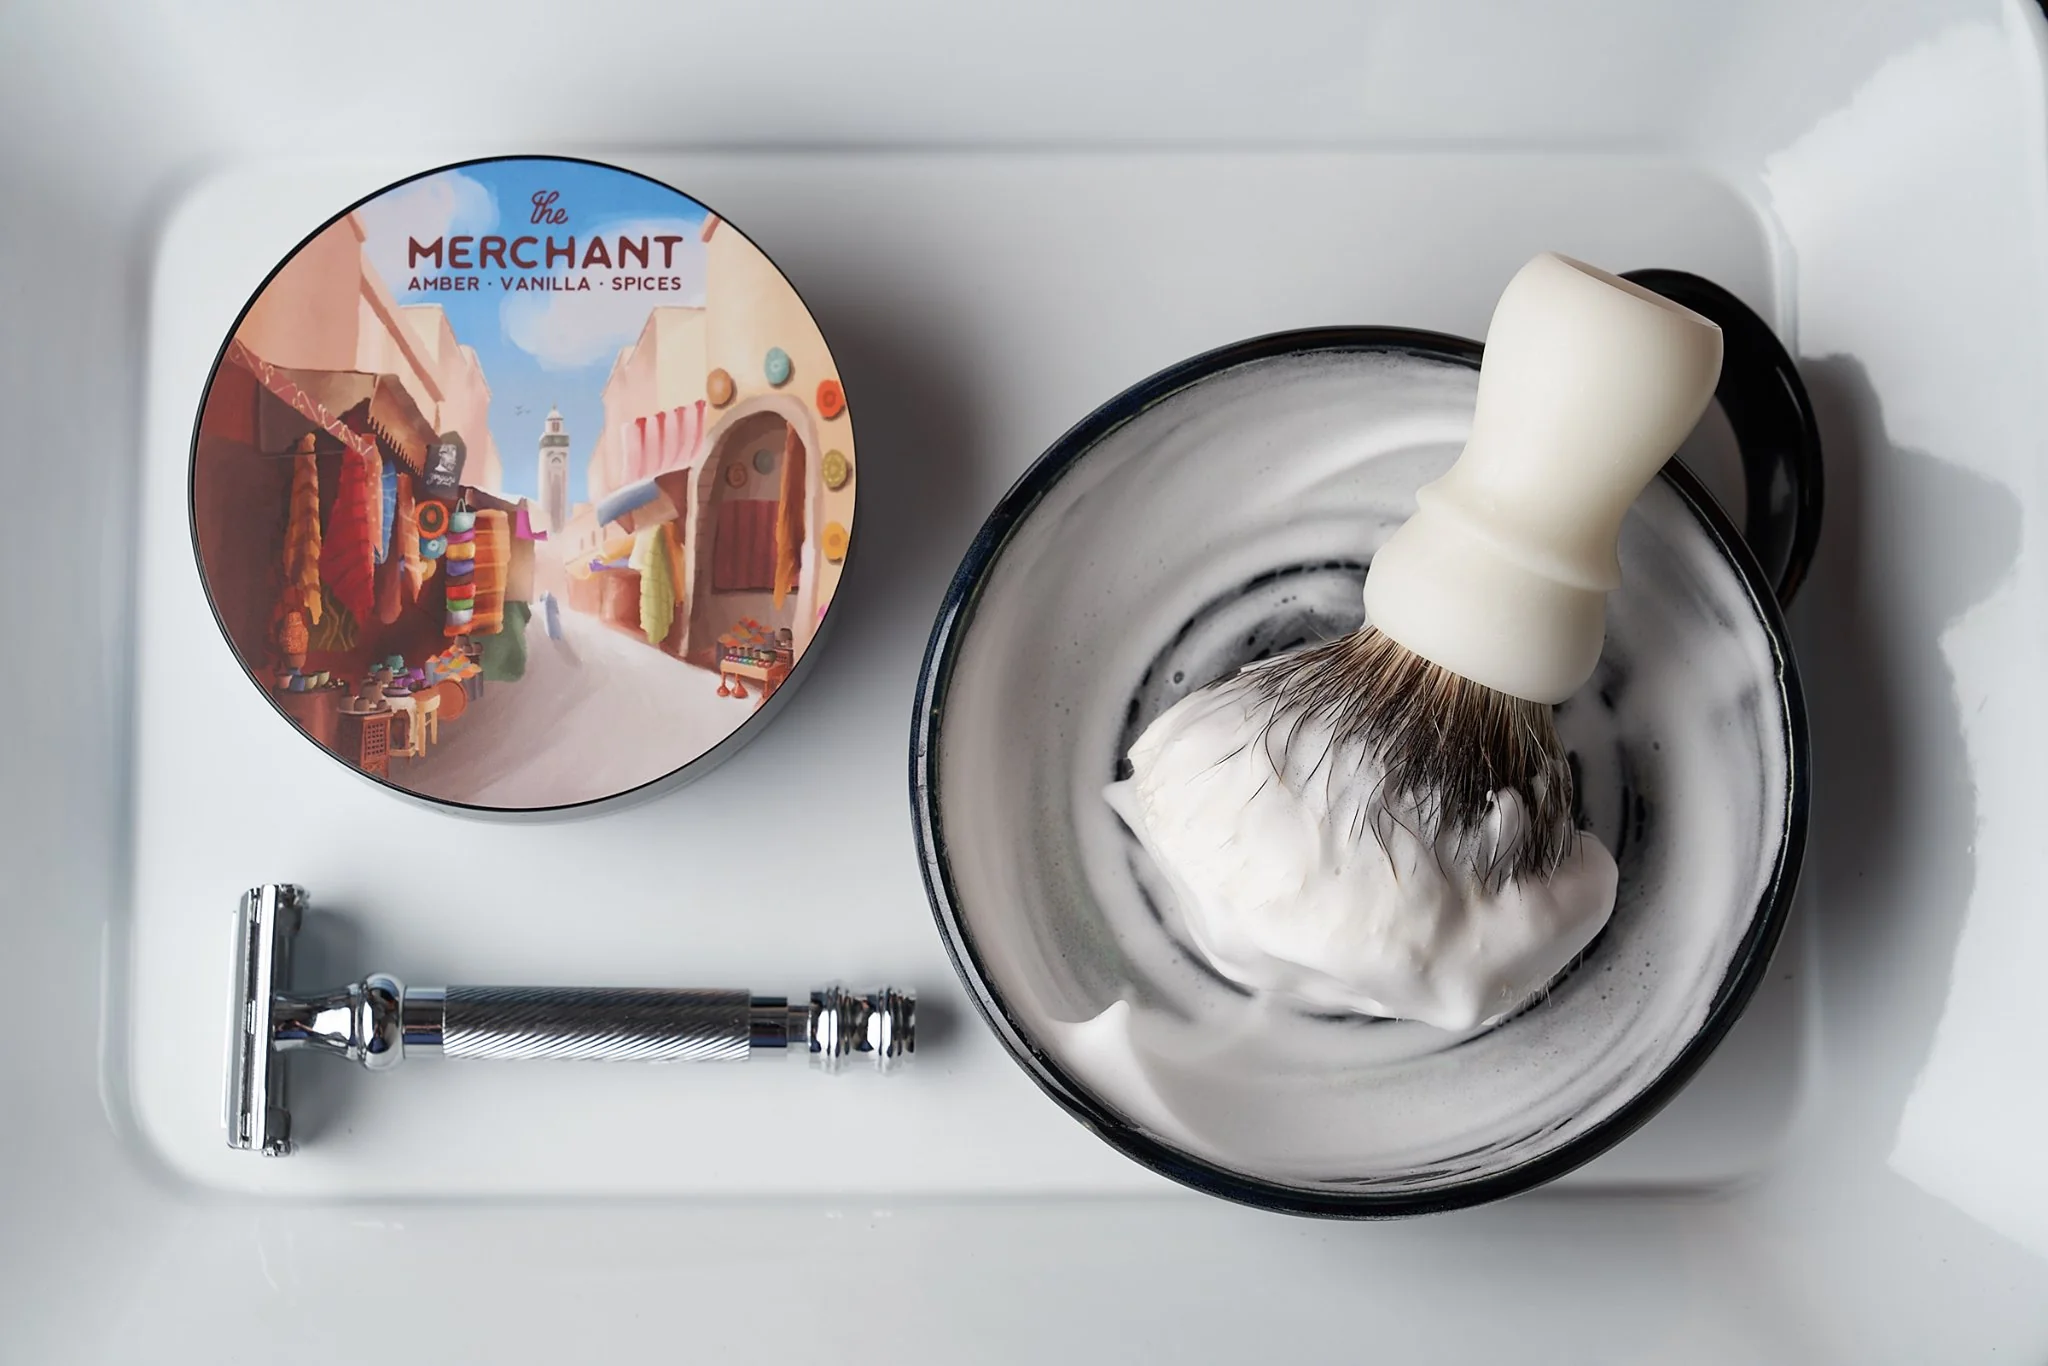 How To Use Shaving Brush And Soap